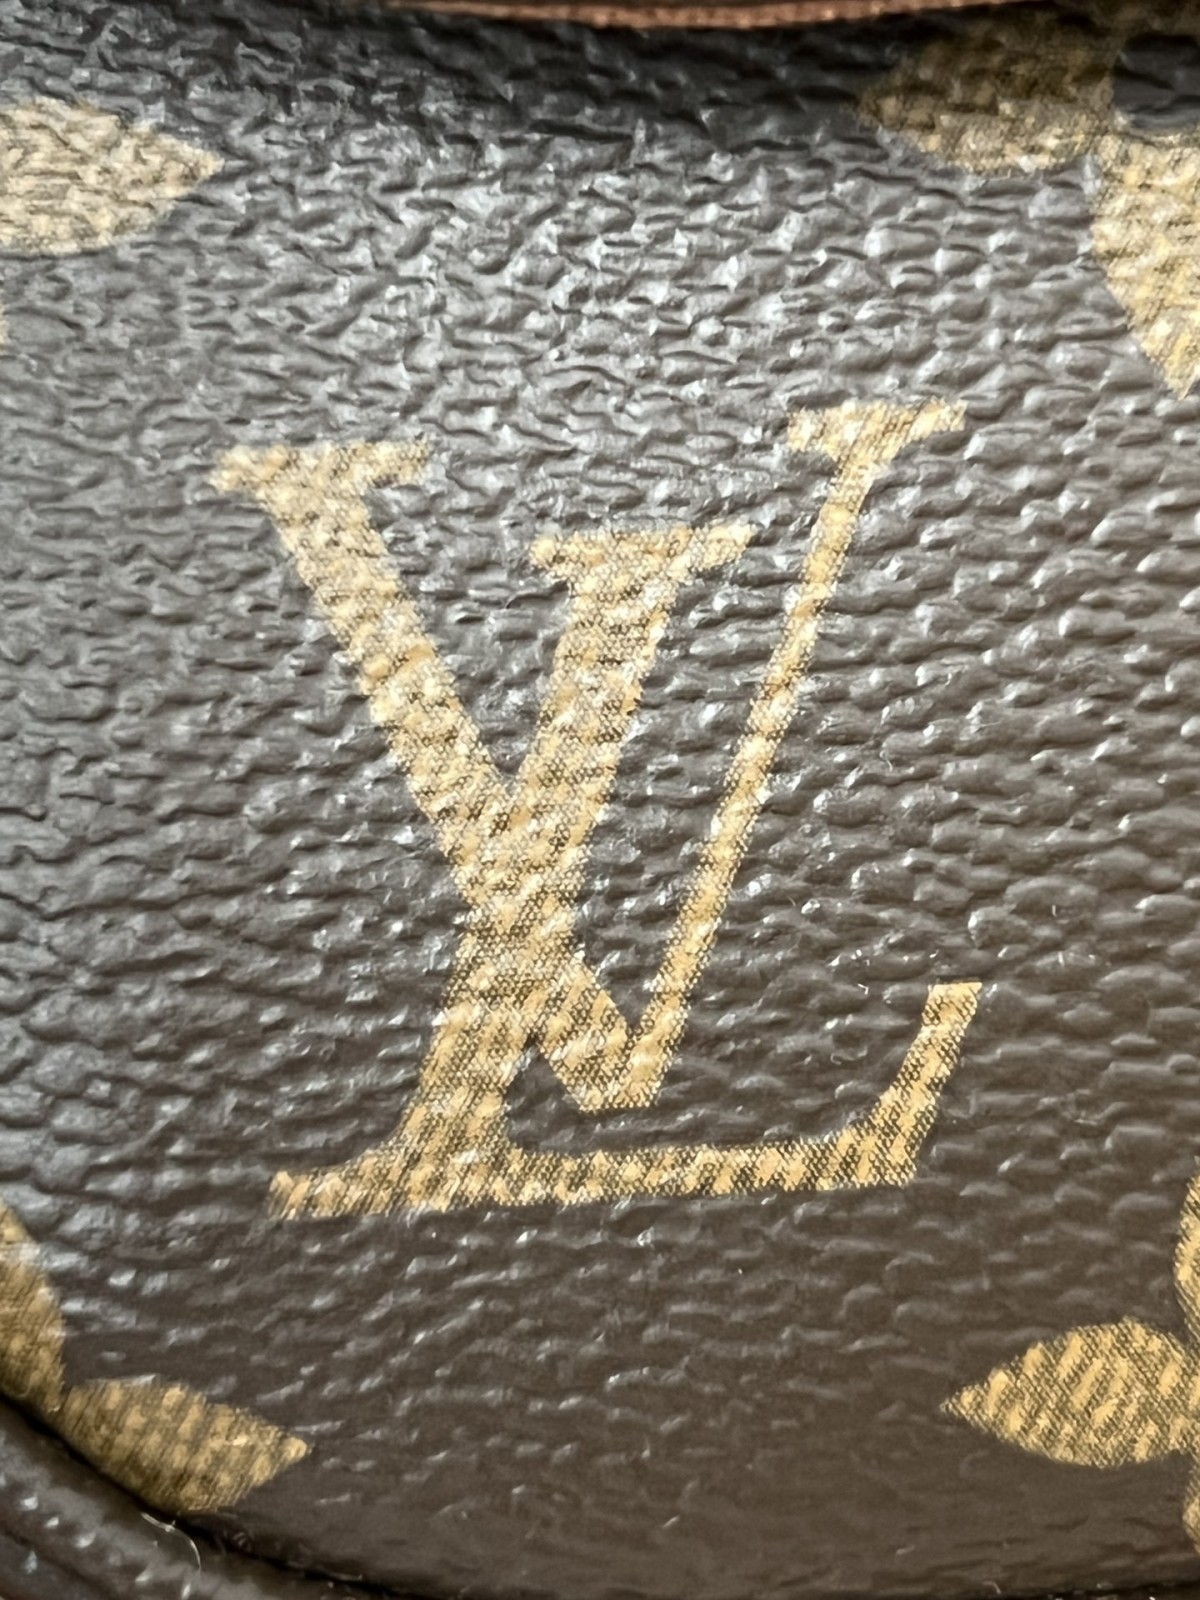 A Glance of Shebag workshop and warehouse for Louis Vuitton new WOC IVY bags of M81911（2024 Week 10）-Best Quality Fake Louis Vuitton Bag Online Store, Replica designer bag ru